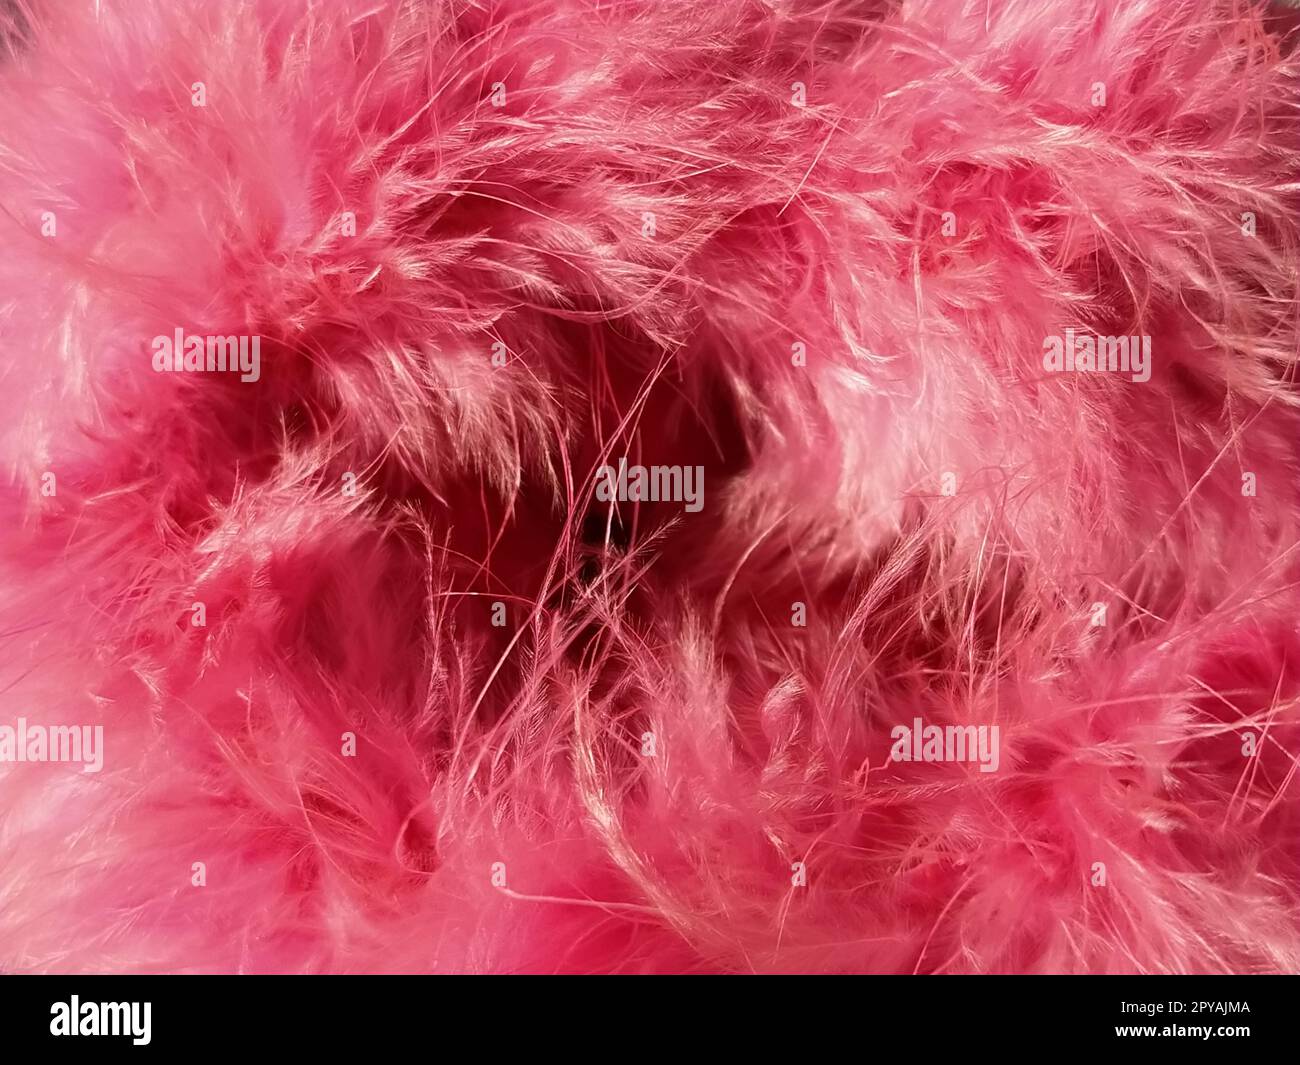 Pink faux fur or pink colored natural bird feathers close-up. Light feathers boa. Delicate texture. Greeting card Happy Valentines Day. Collar from a women's or girl's jacket. Bright pink or color Stock Photo